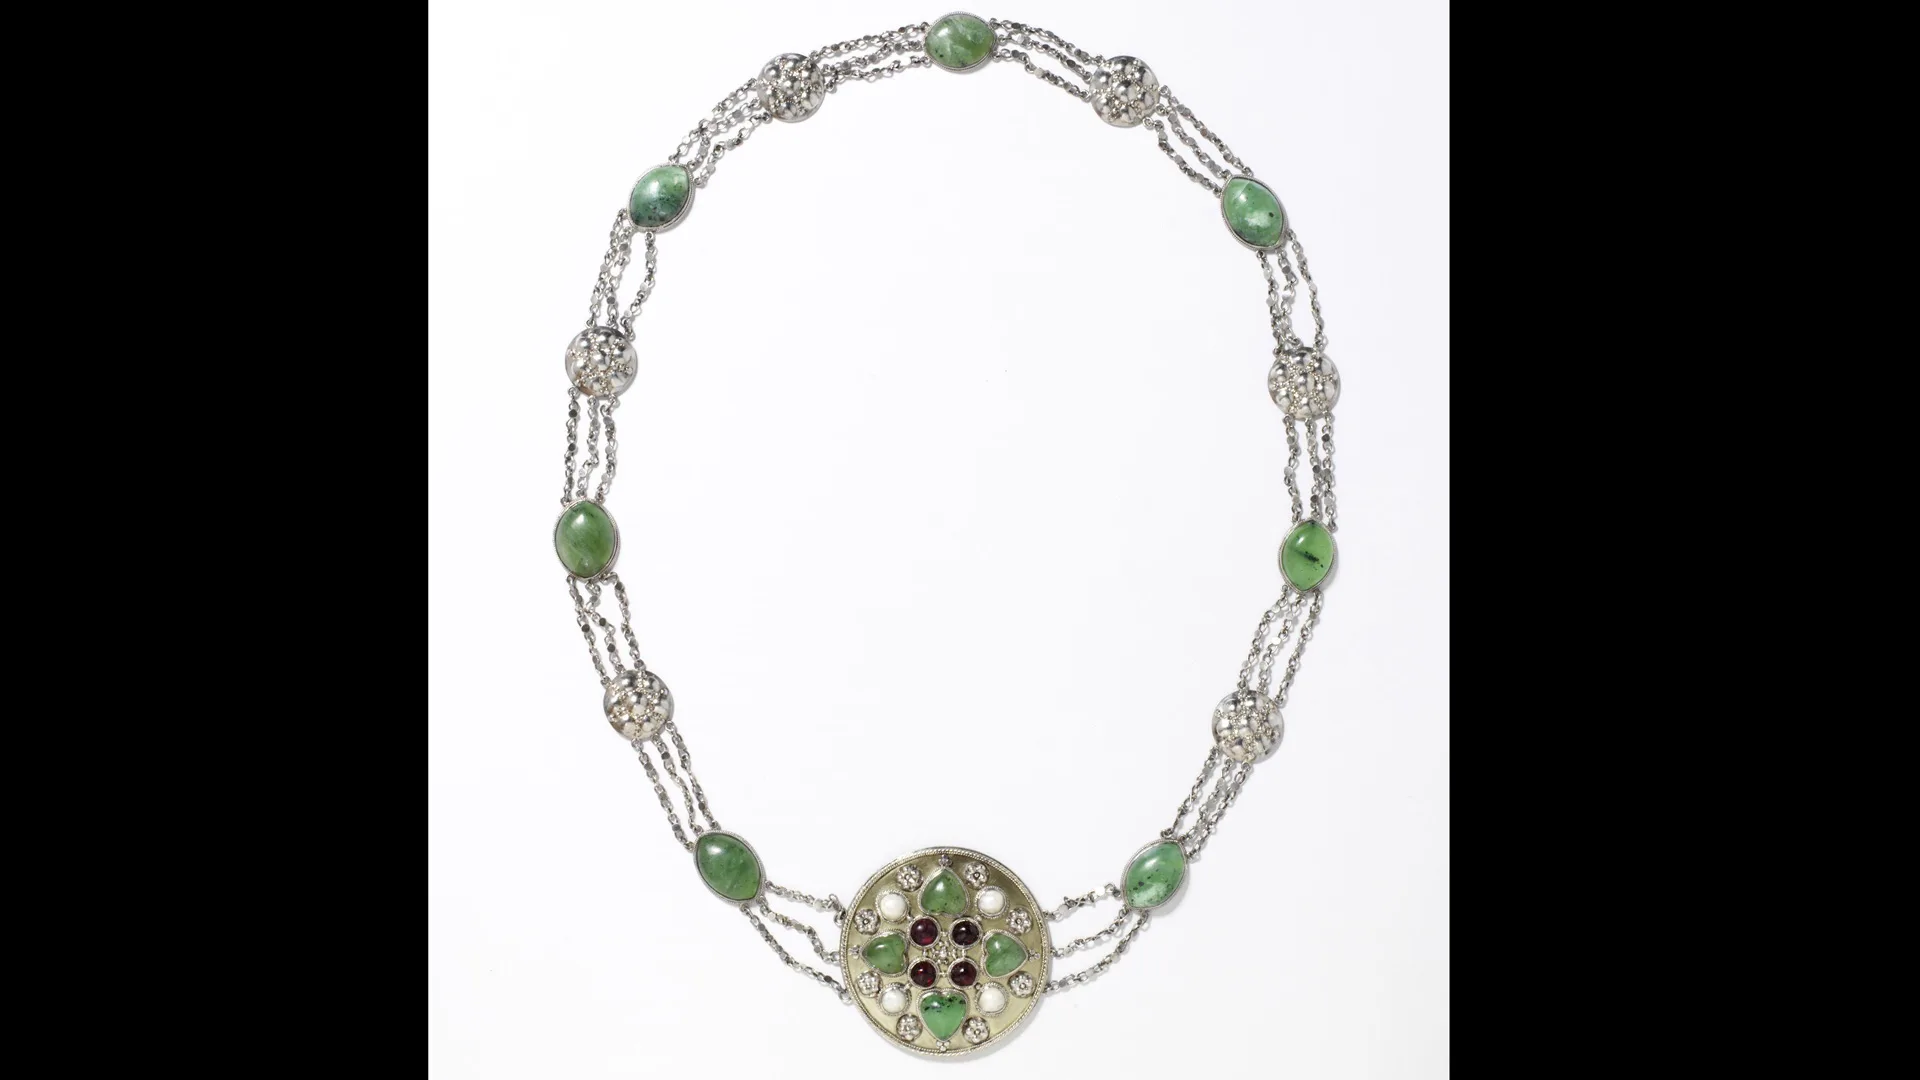 A photograph of a silver necklace designed by May Morris